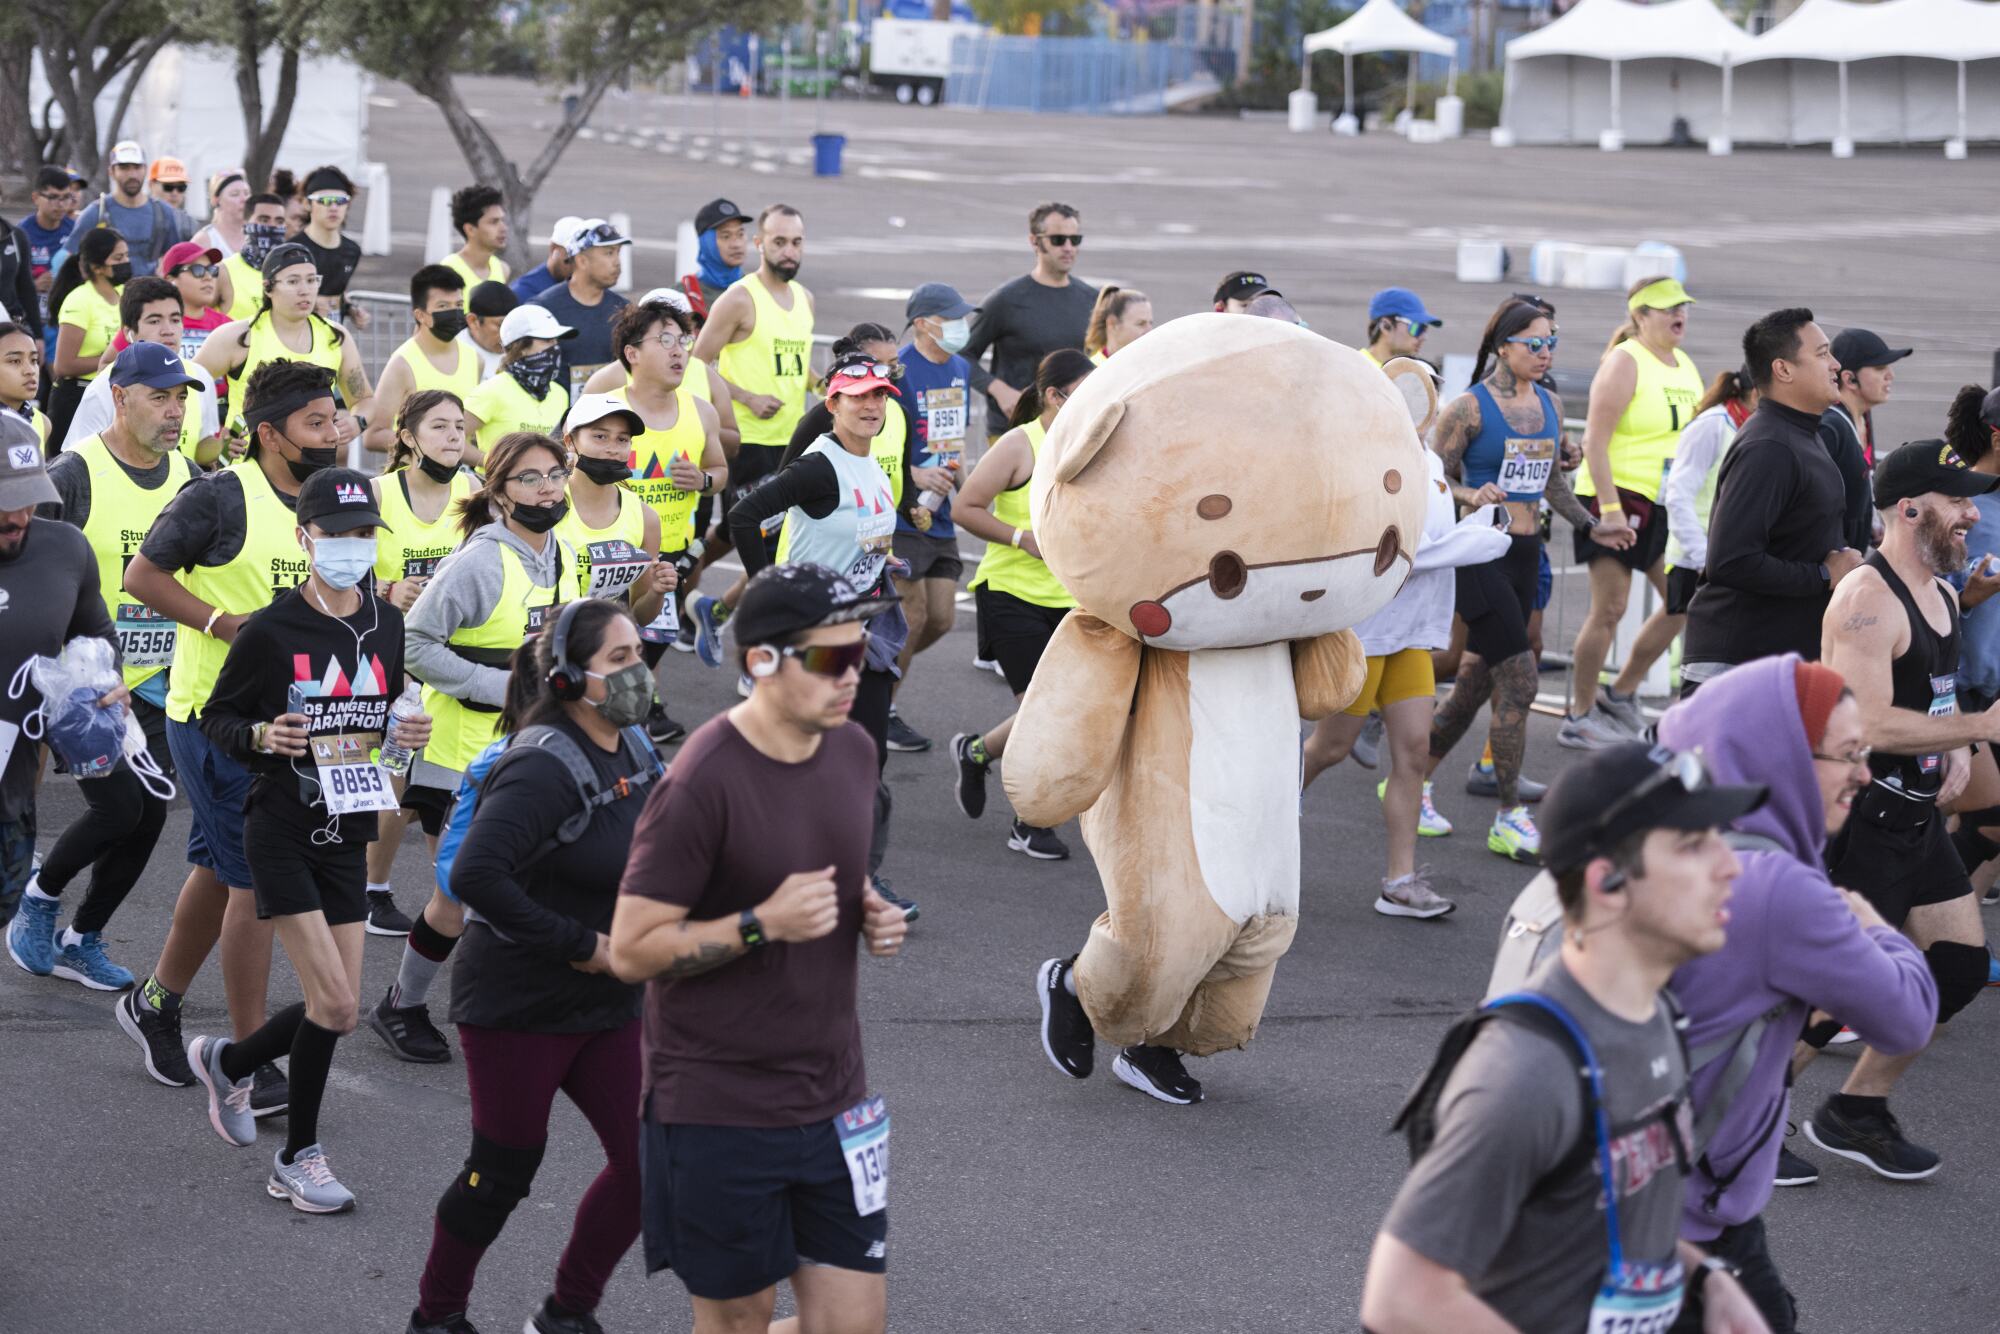 A runner in an animated bear costume participates in the Los Angeles Marathon alongside other runners.